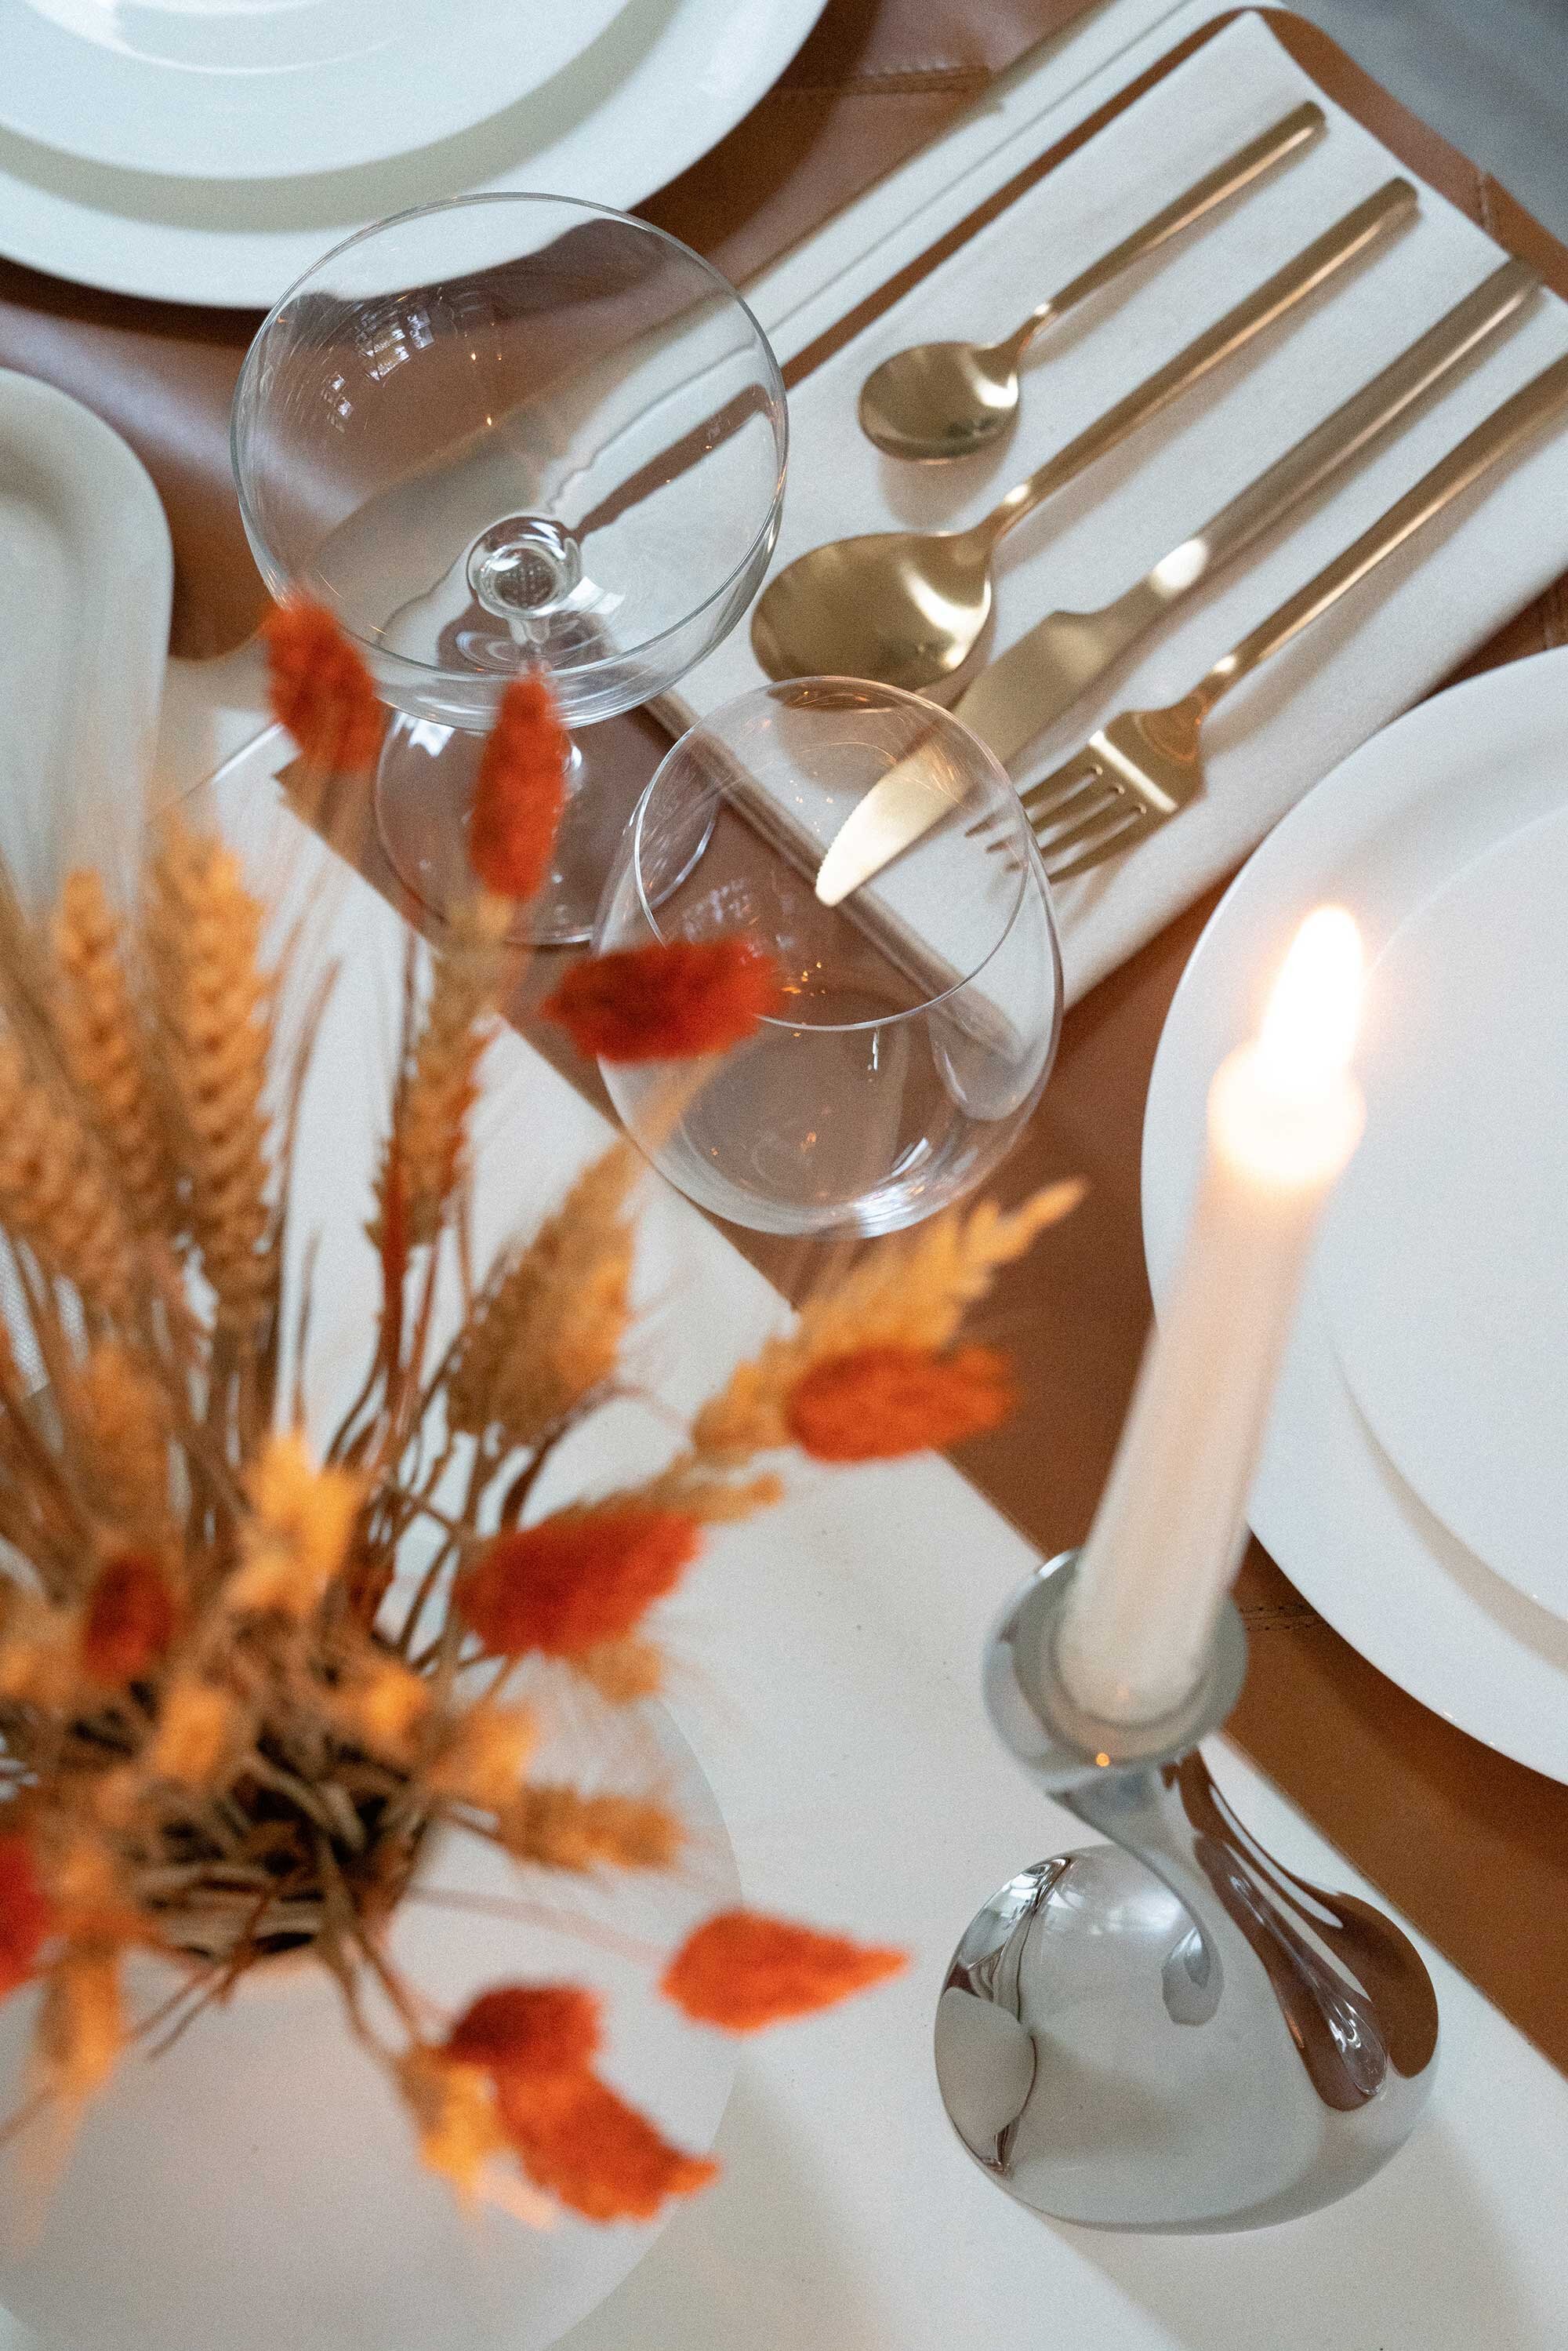 Thanksgiving table settings elegant gold. Sarah Butler of @sarahchristine Thanksgiving table settings featuring Georg Jensen Cobra Candleholder Set, tan leather placemats, and modern gold plated flatware with rustic dried flowers 12.jpg